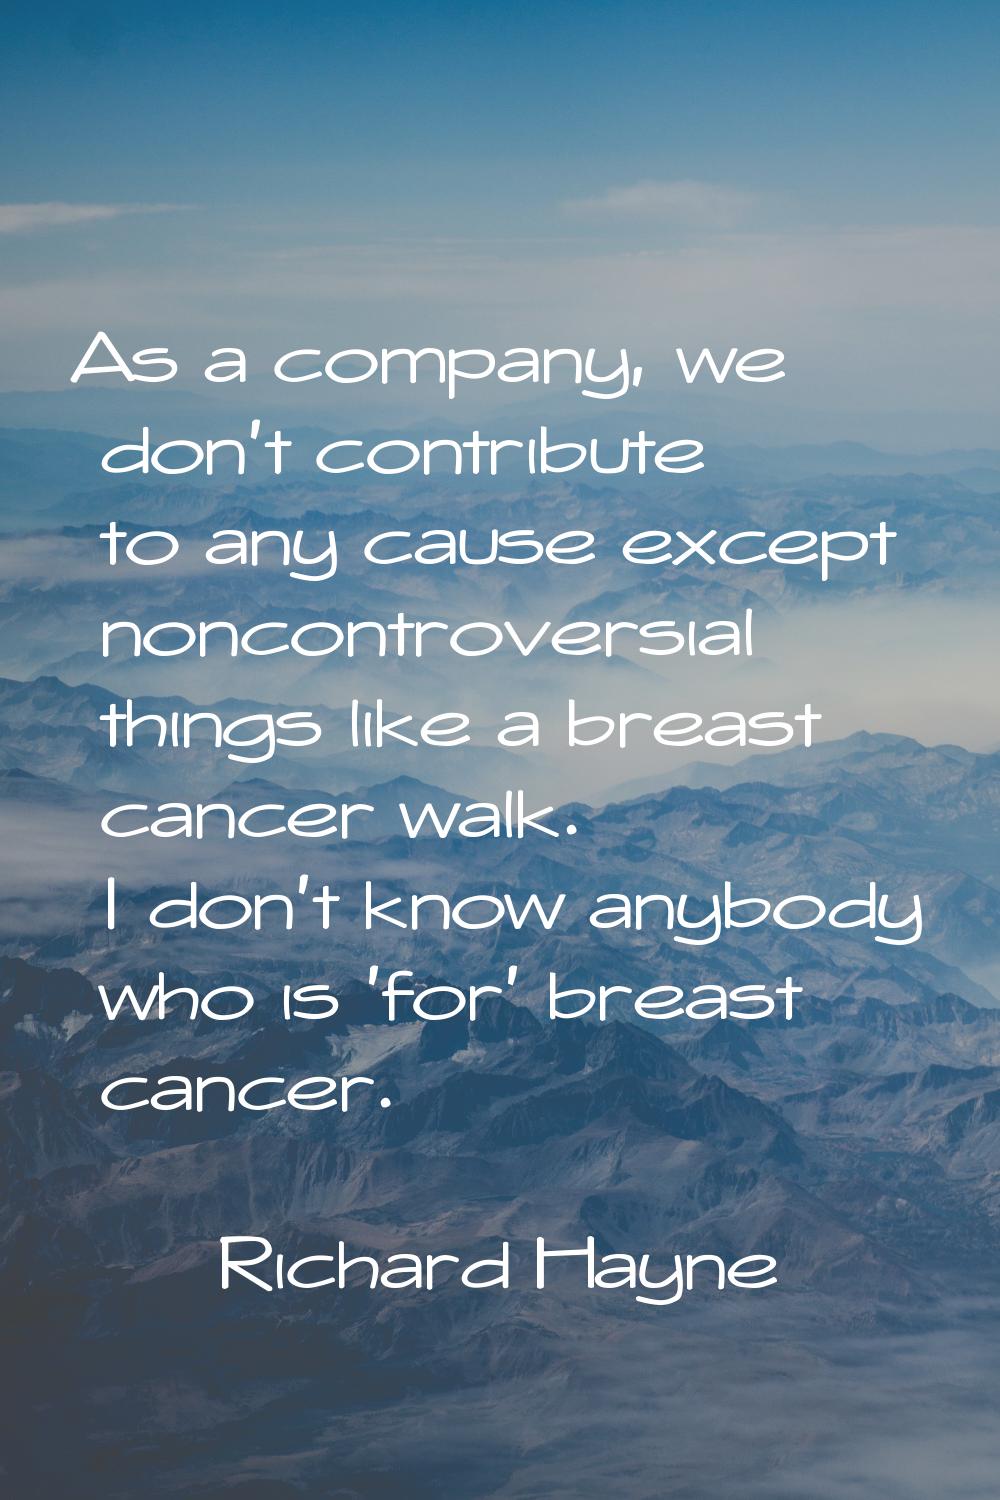 As a company, we don't contribute to any cause except noncontroversial things like a breast cancer 